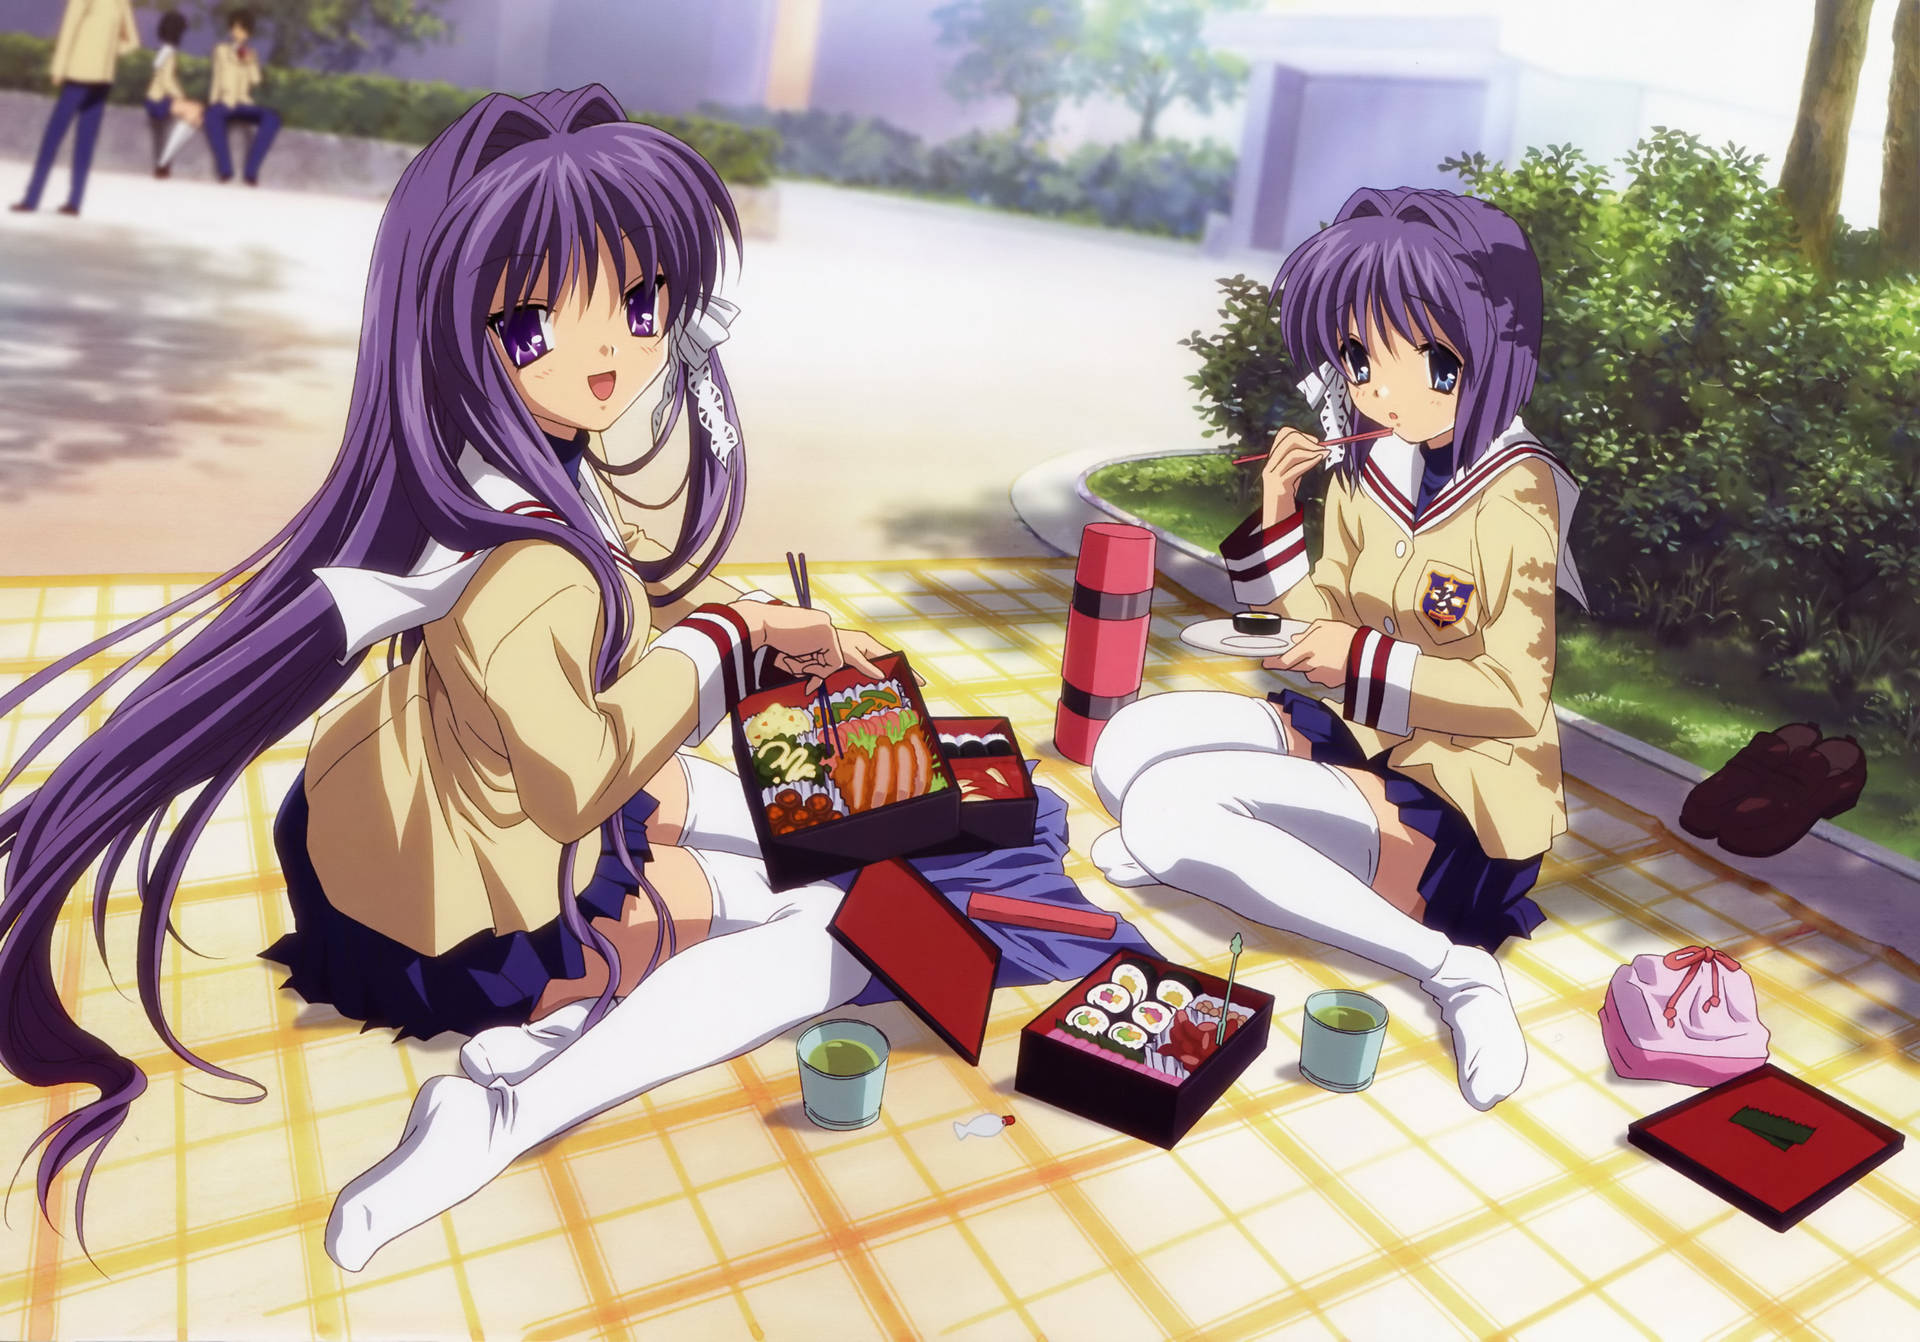 Kyou And Ryou Clannad Background